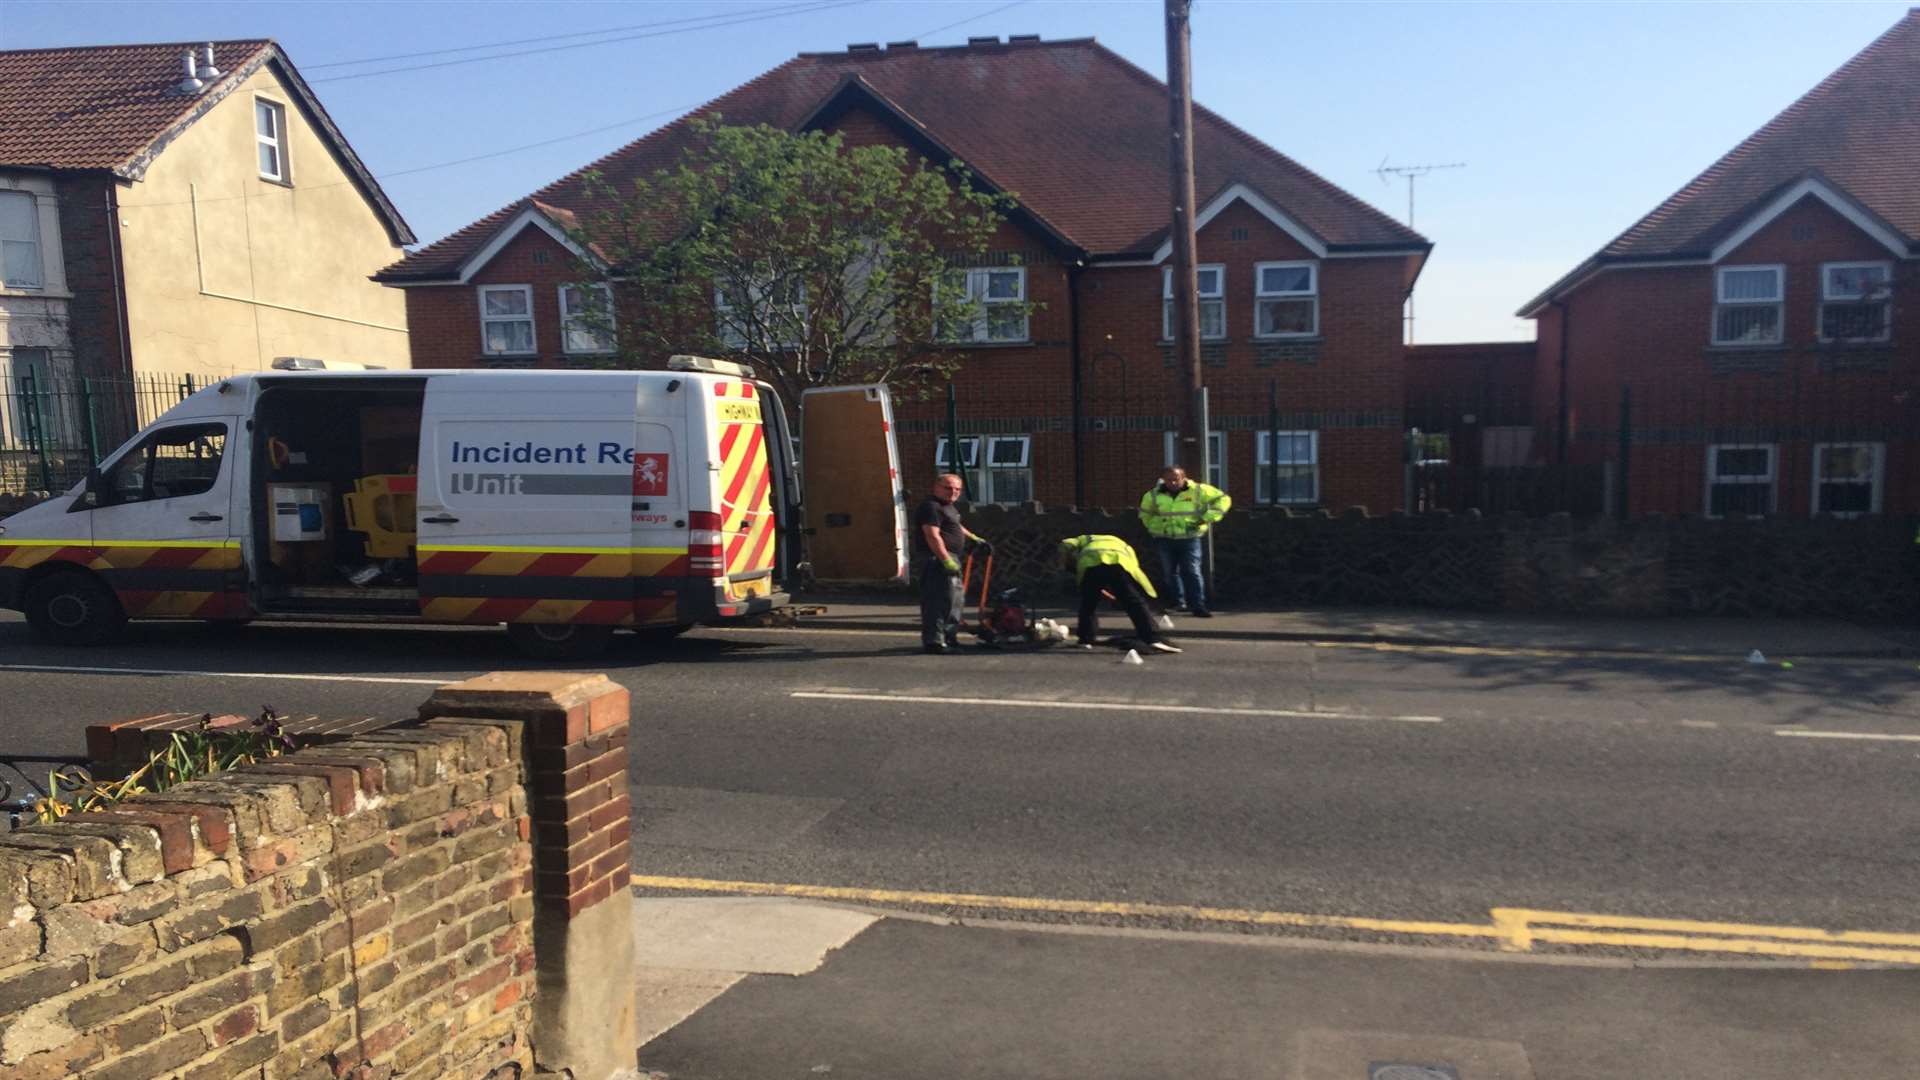 KCC workmen carry out emergency repairs to a pothole in Old Road West, Gravesend